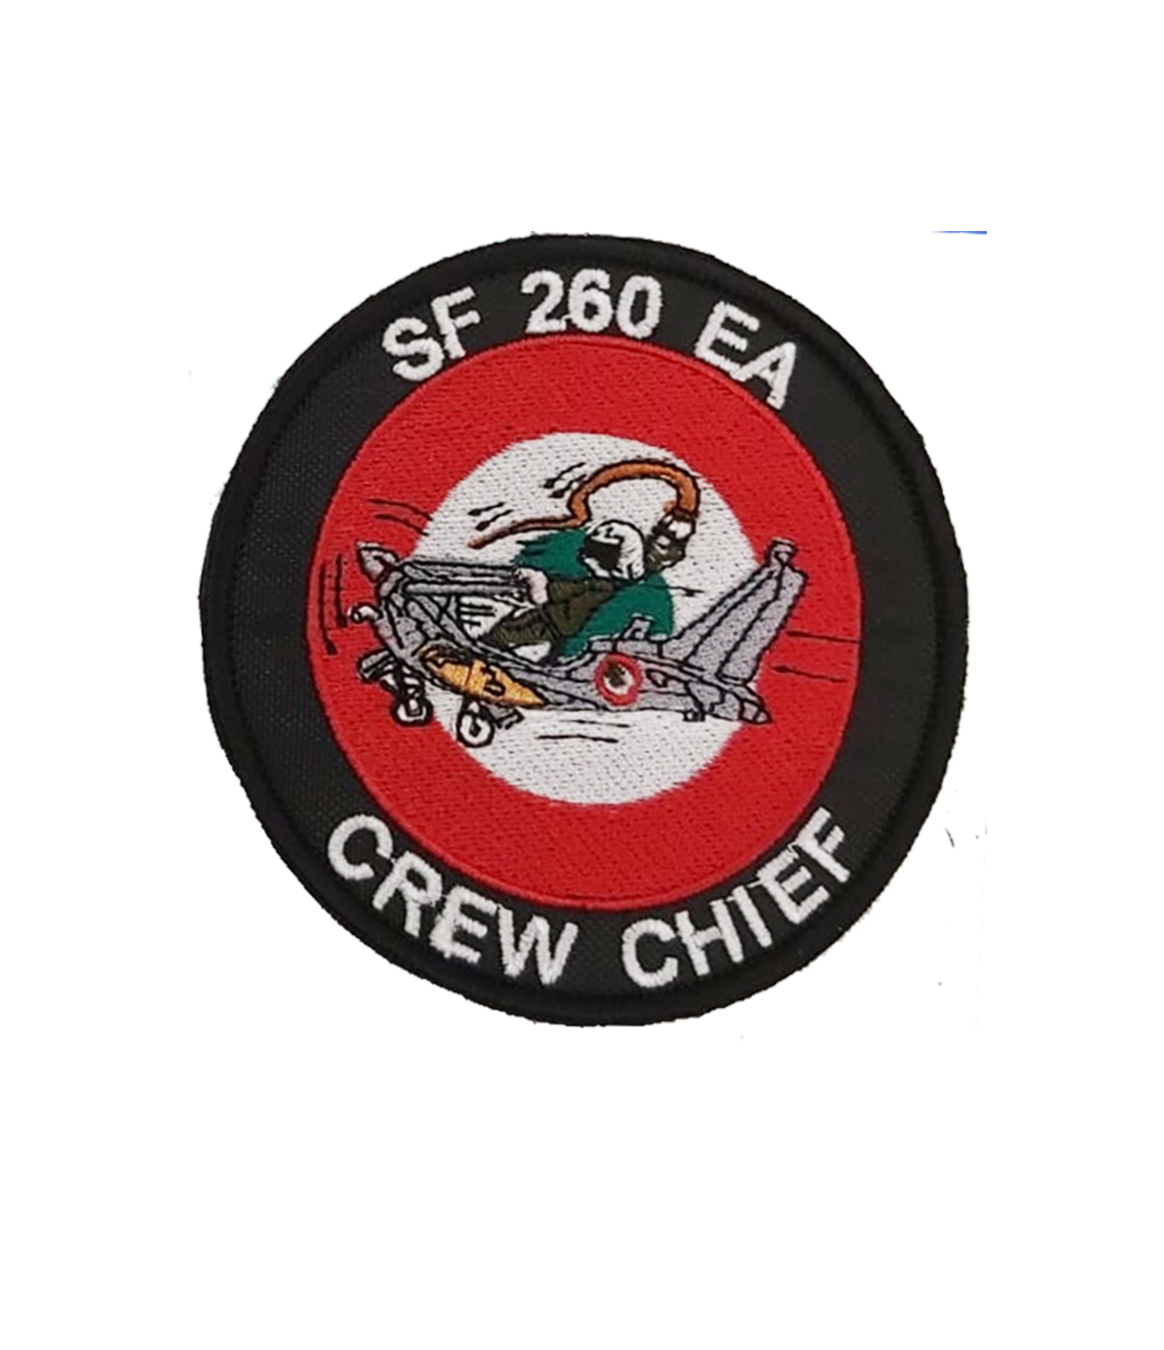 PATCH SF 260 CREW CHIEF